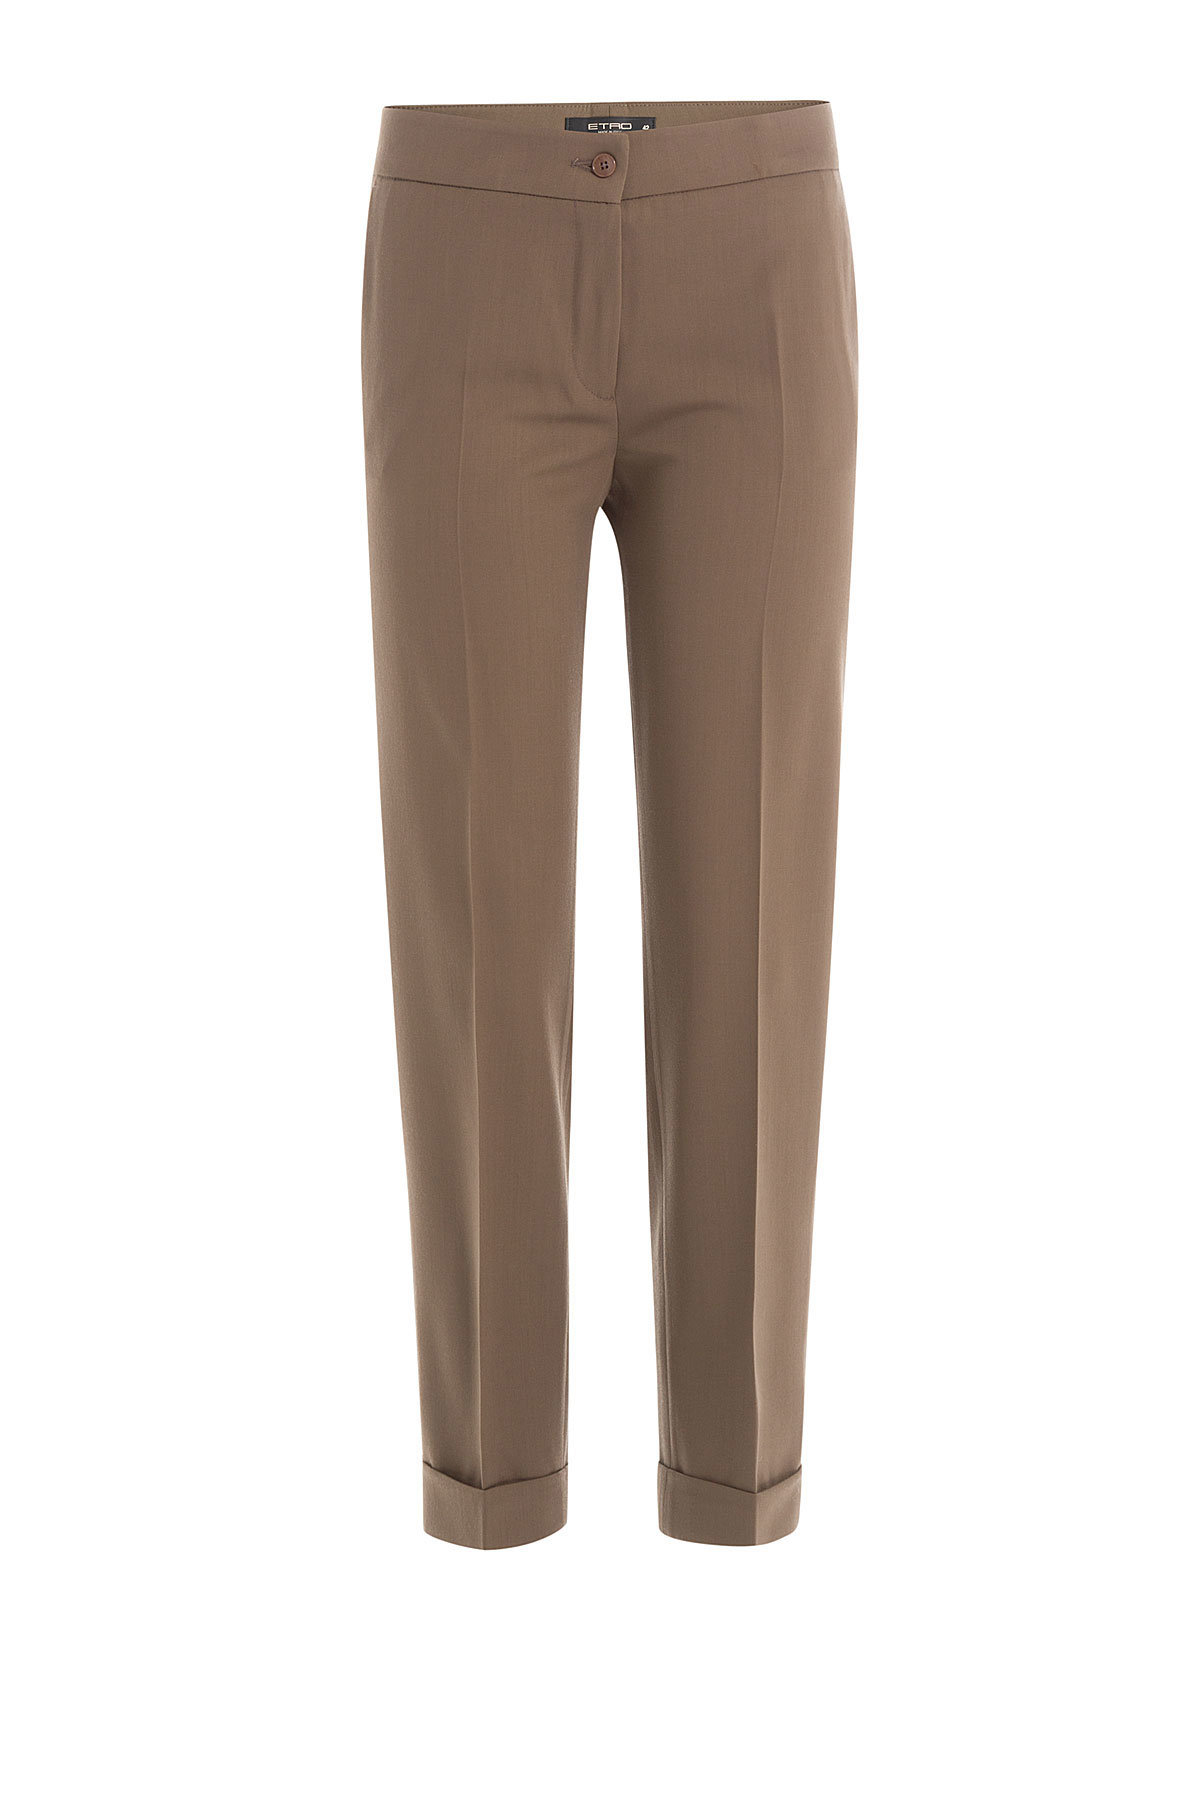 Etro - Tailored Wool Trousers